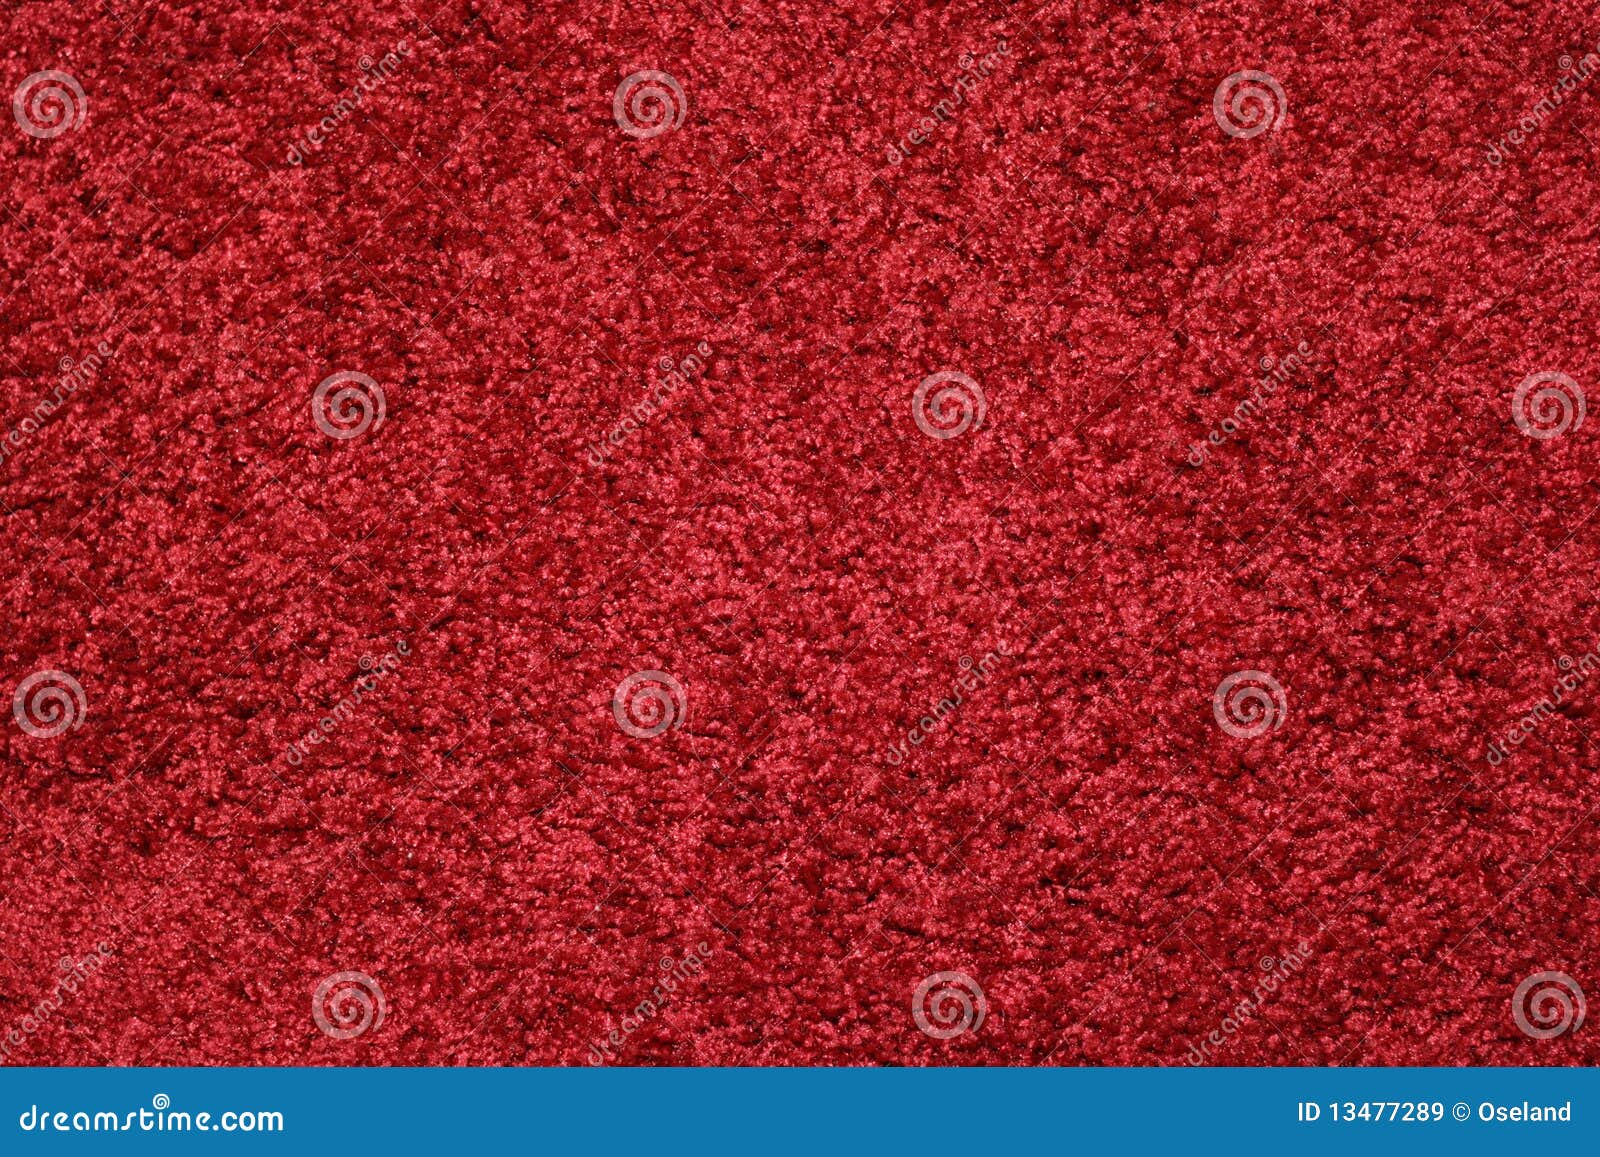 red carpet texture background